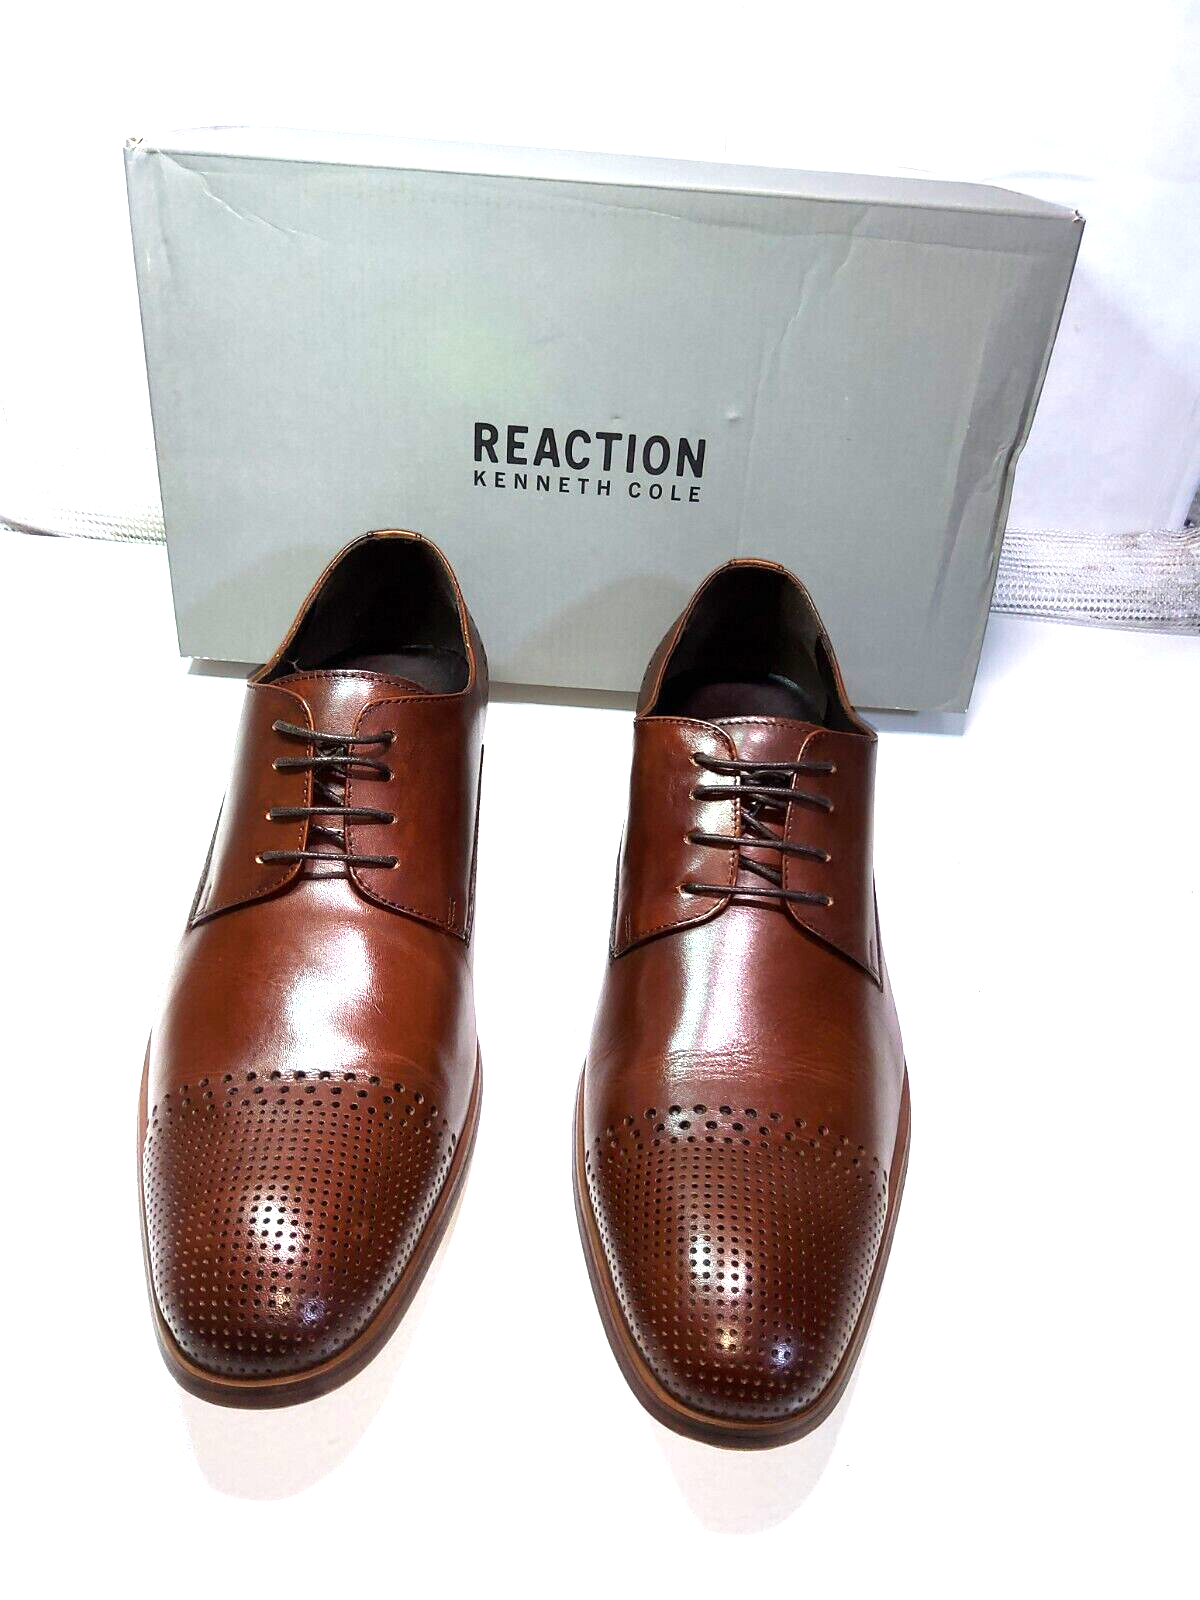 Primary image for Kenneth Cole Mens Leather size 11-M Dark Cognac Oxford shoes New in Box